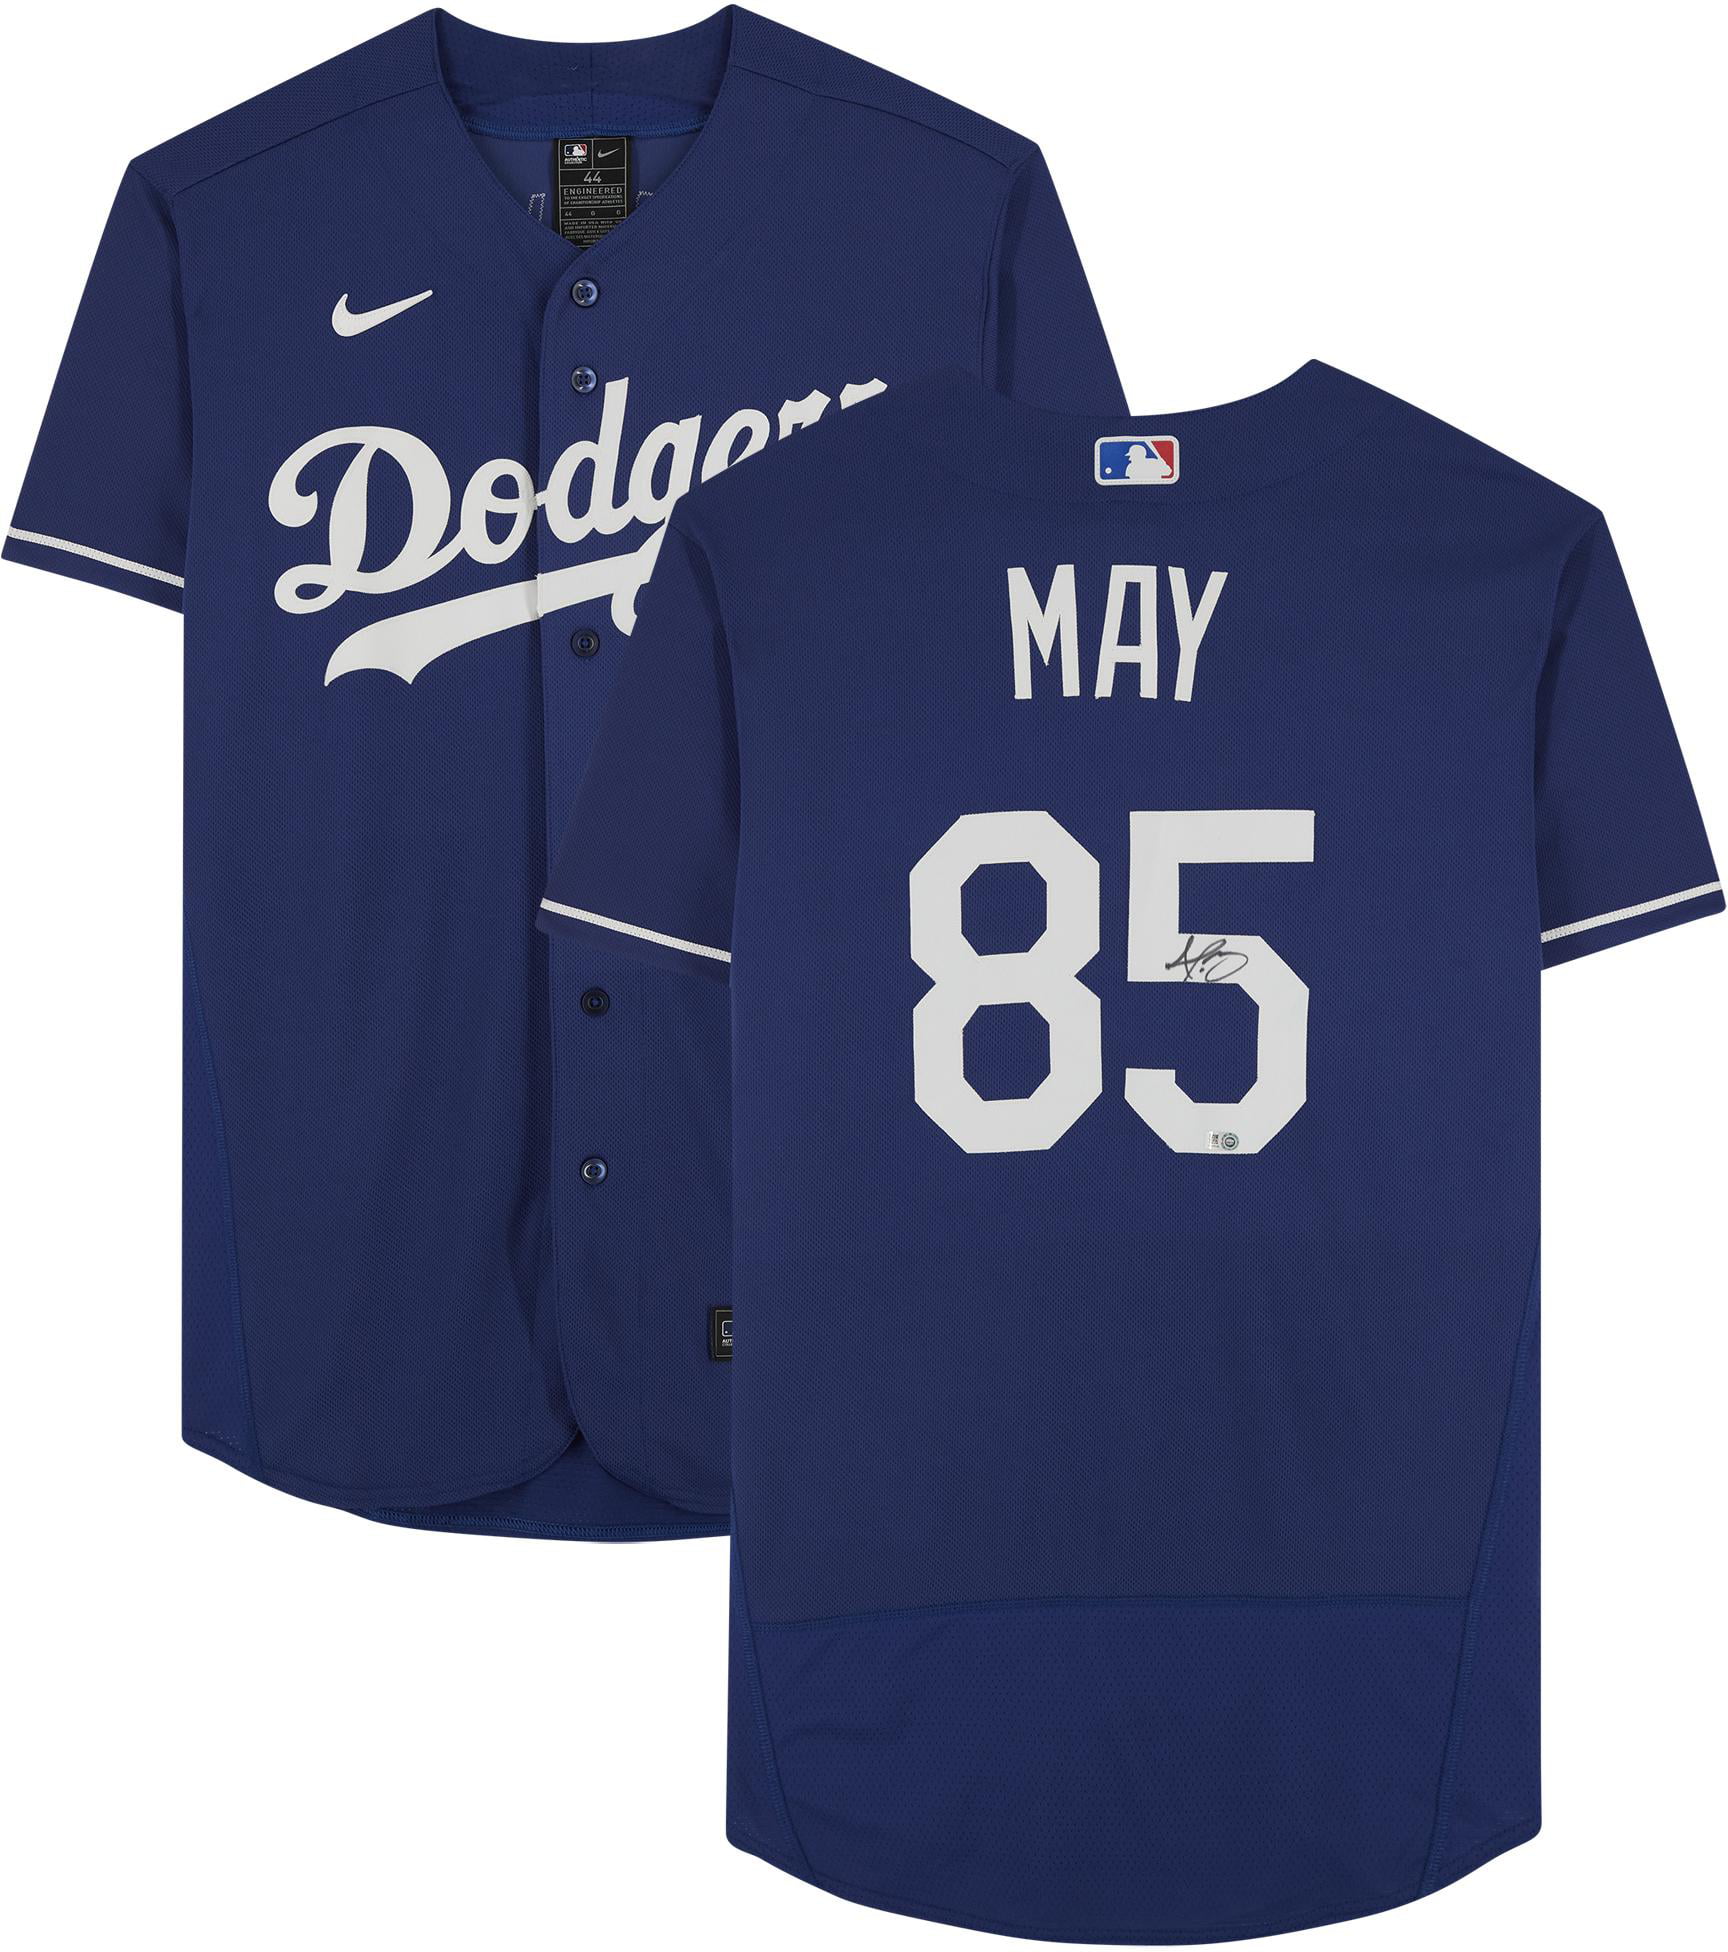 Fanatics Authentic Certified Cody Bellinger Los Angeles Dodgers Autographed Majestic White Replica Jersey with2017 NL ROY Inscription 